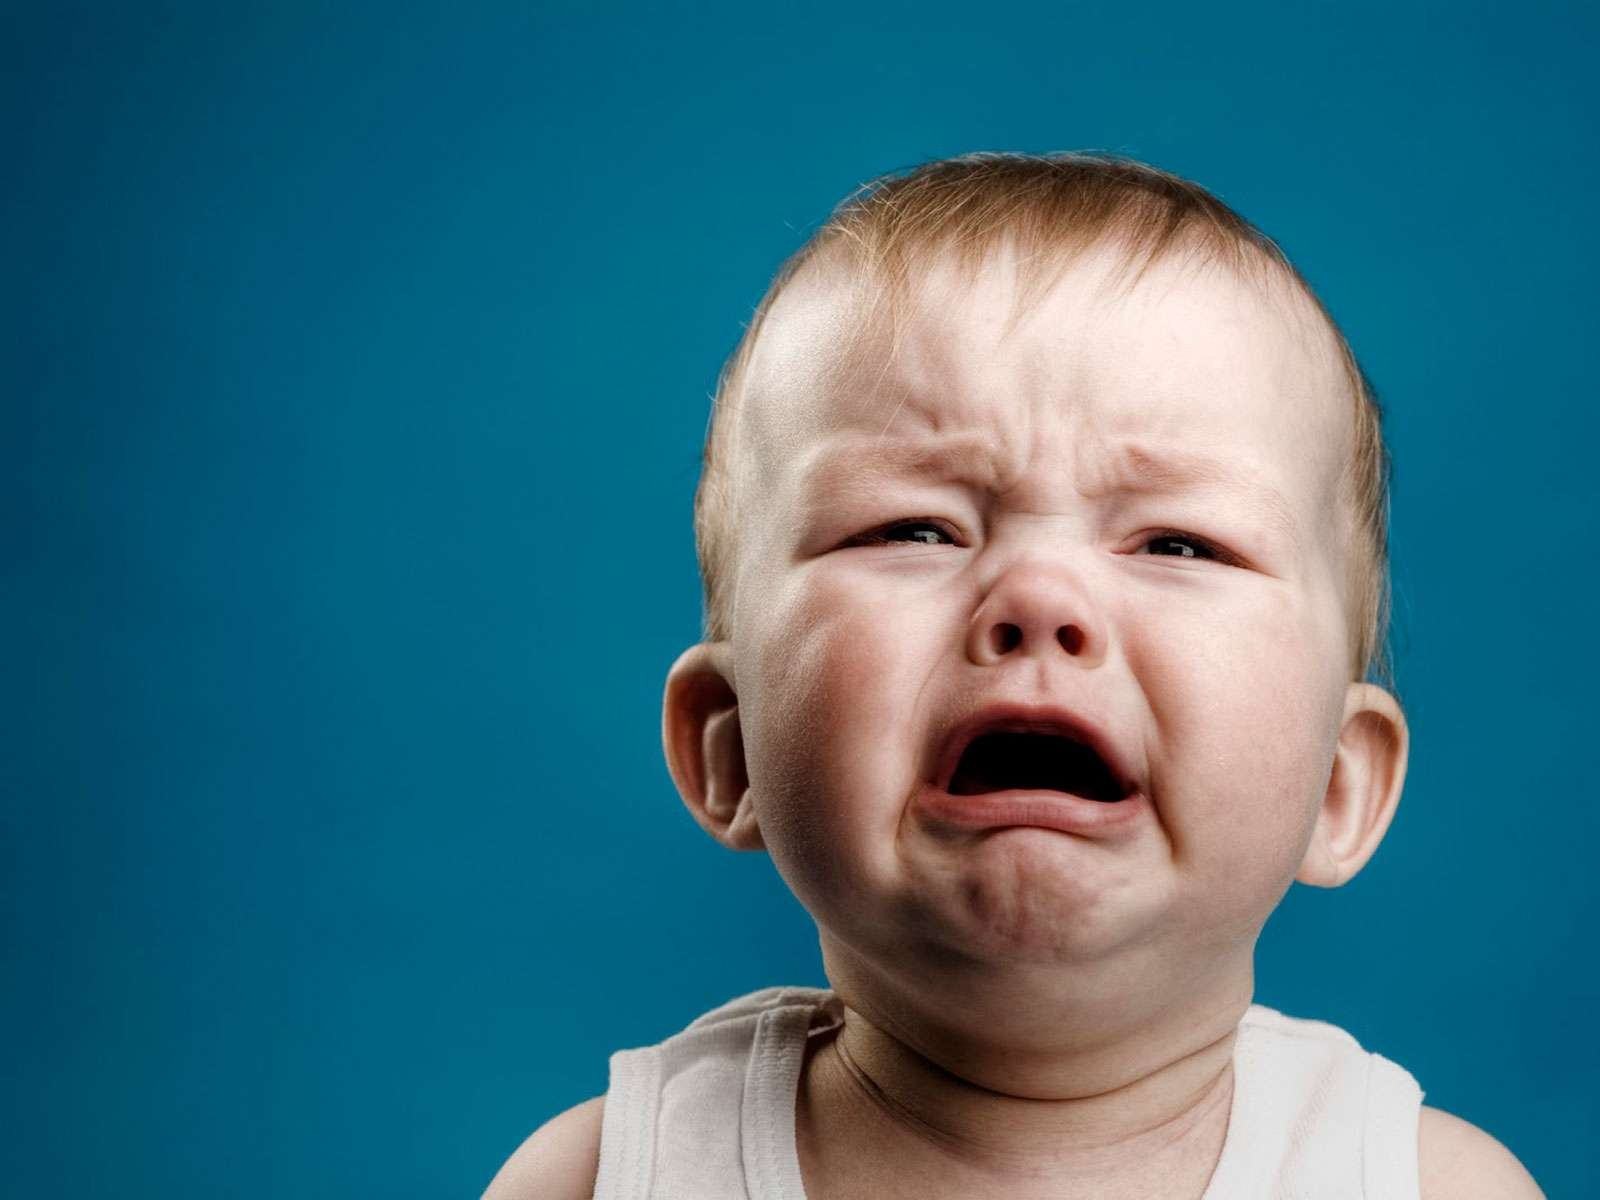 Cute Crying Baby Unique Hd Wallpapers - Cute Baby Crying Hd - HD Wallpaper 